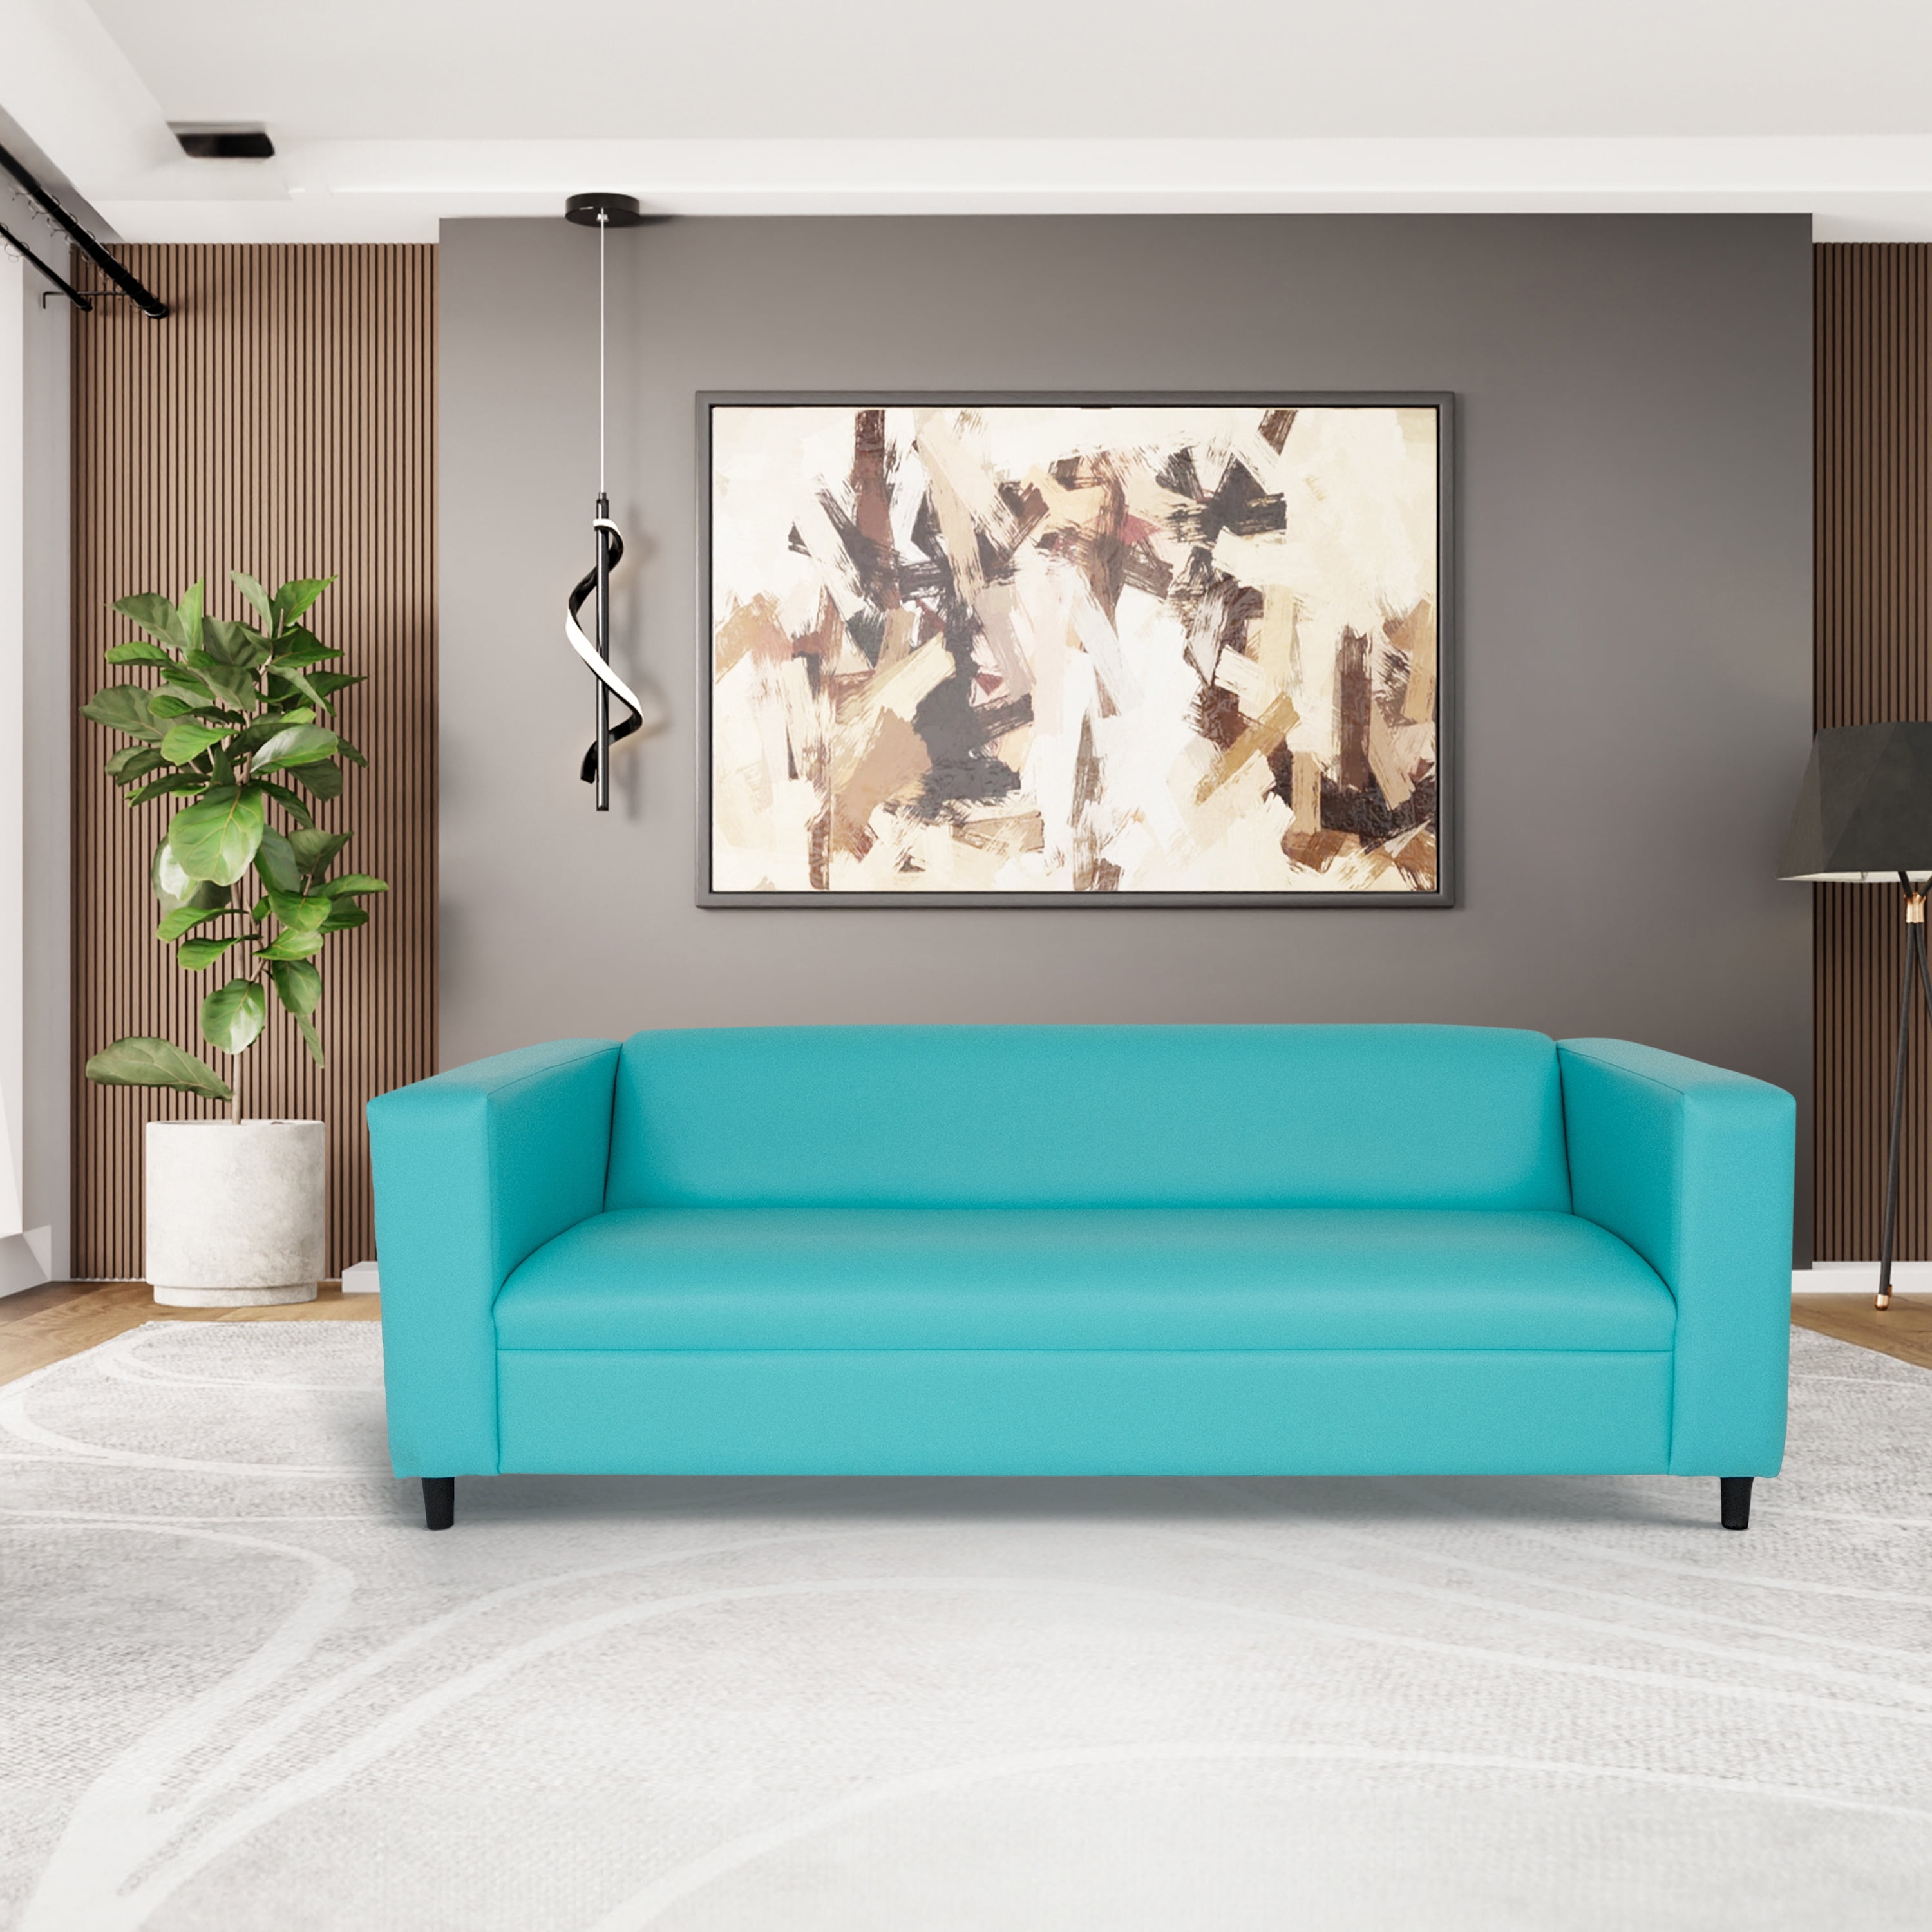 Dropship Teal Faux Leather Sofa, Modern 3-Seater Sofas Couches For Living  Room, Bedroom, Office, And Apartment With Solid Wood Frame to Sell Online  at a Lower Price